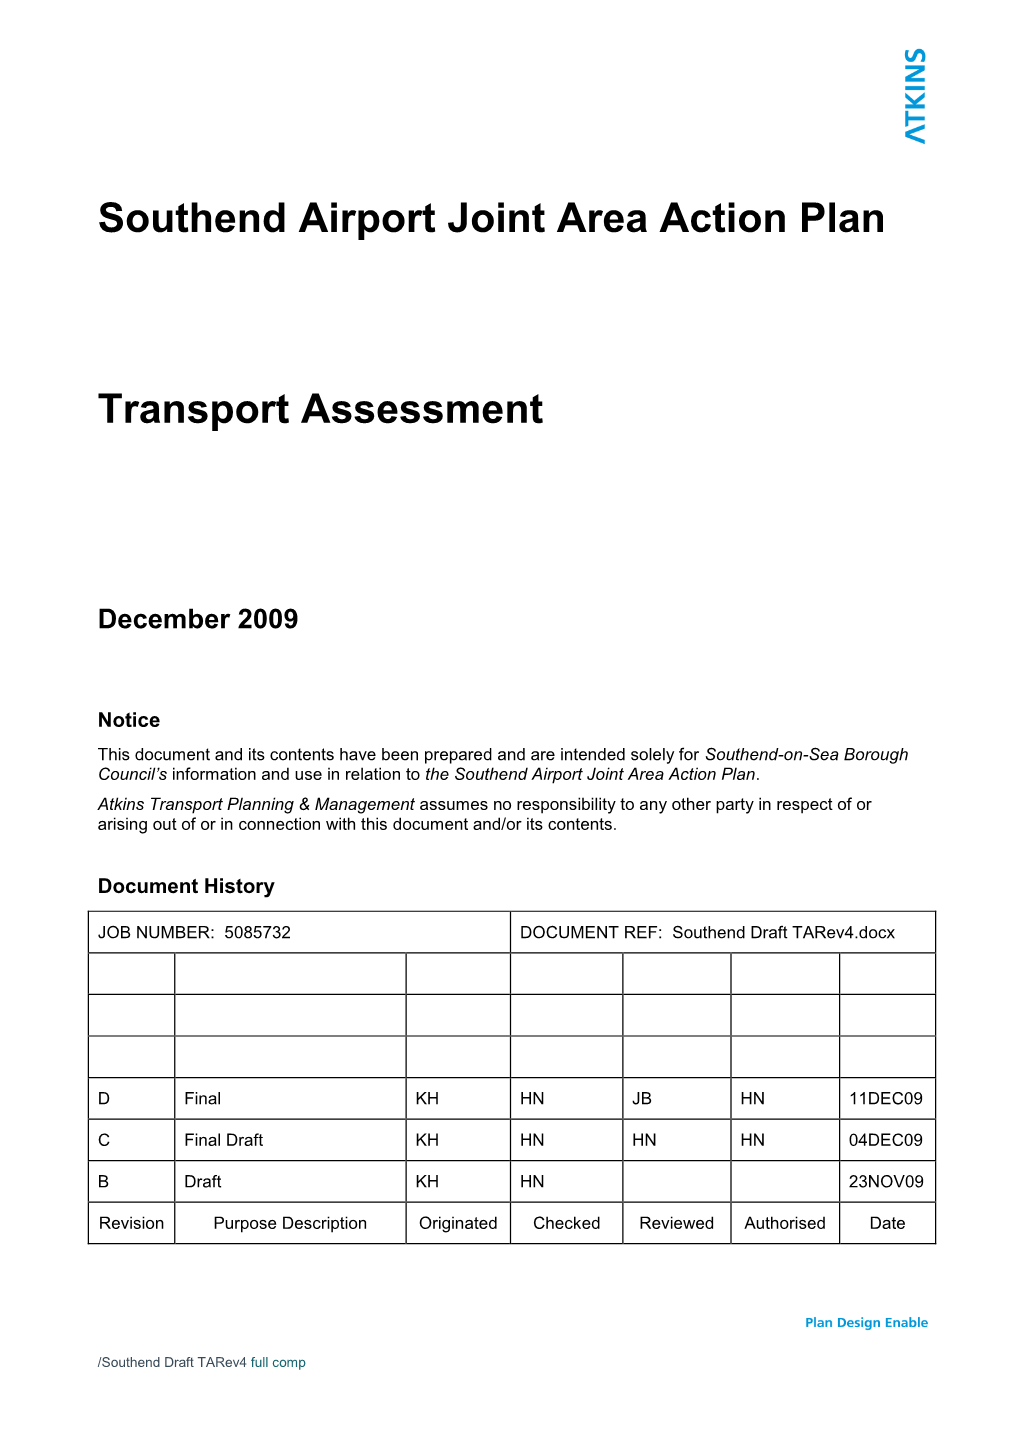 Southend Airport Joint Area Action Plan Transport Assessment